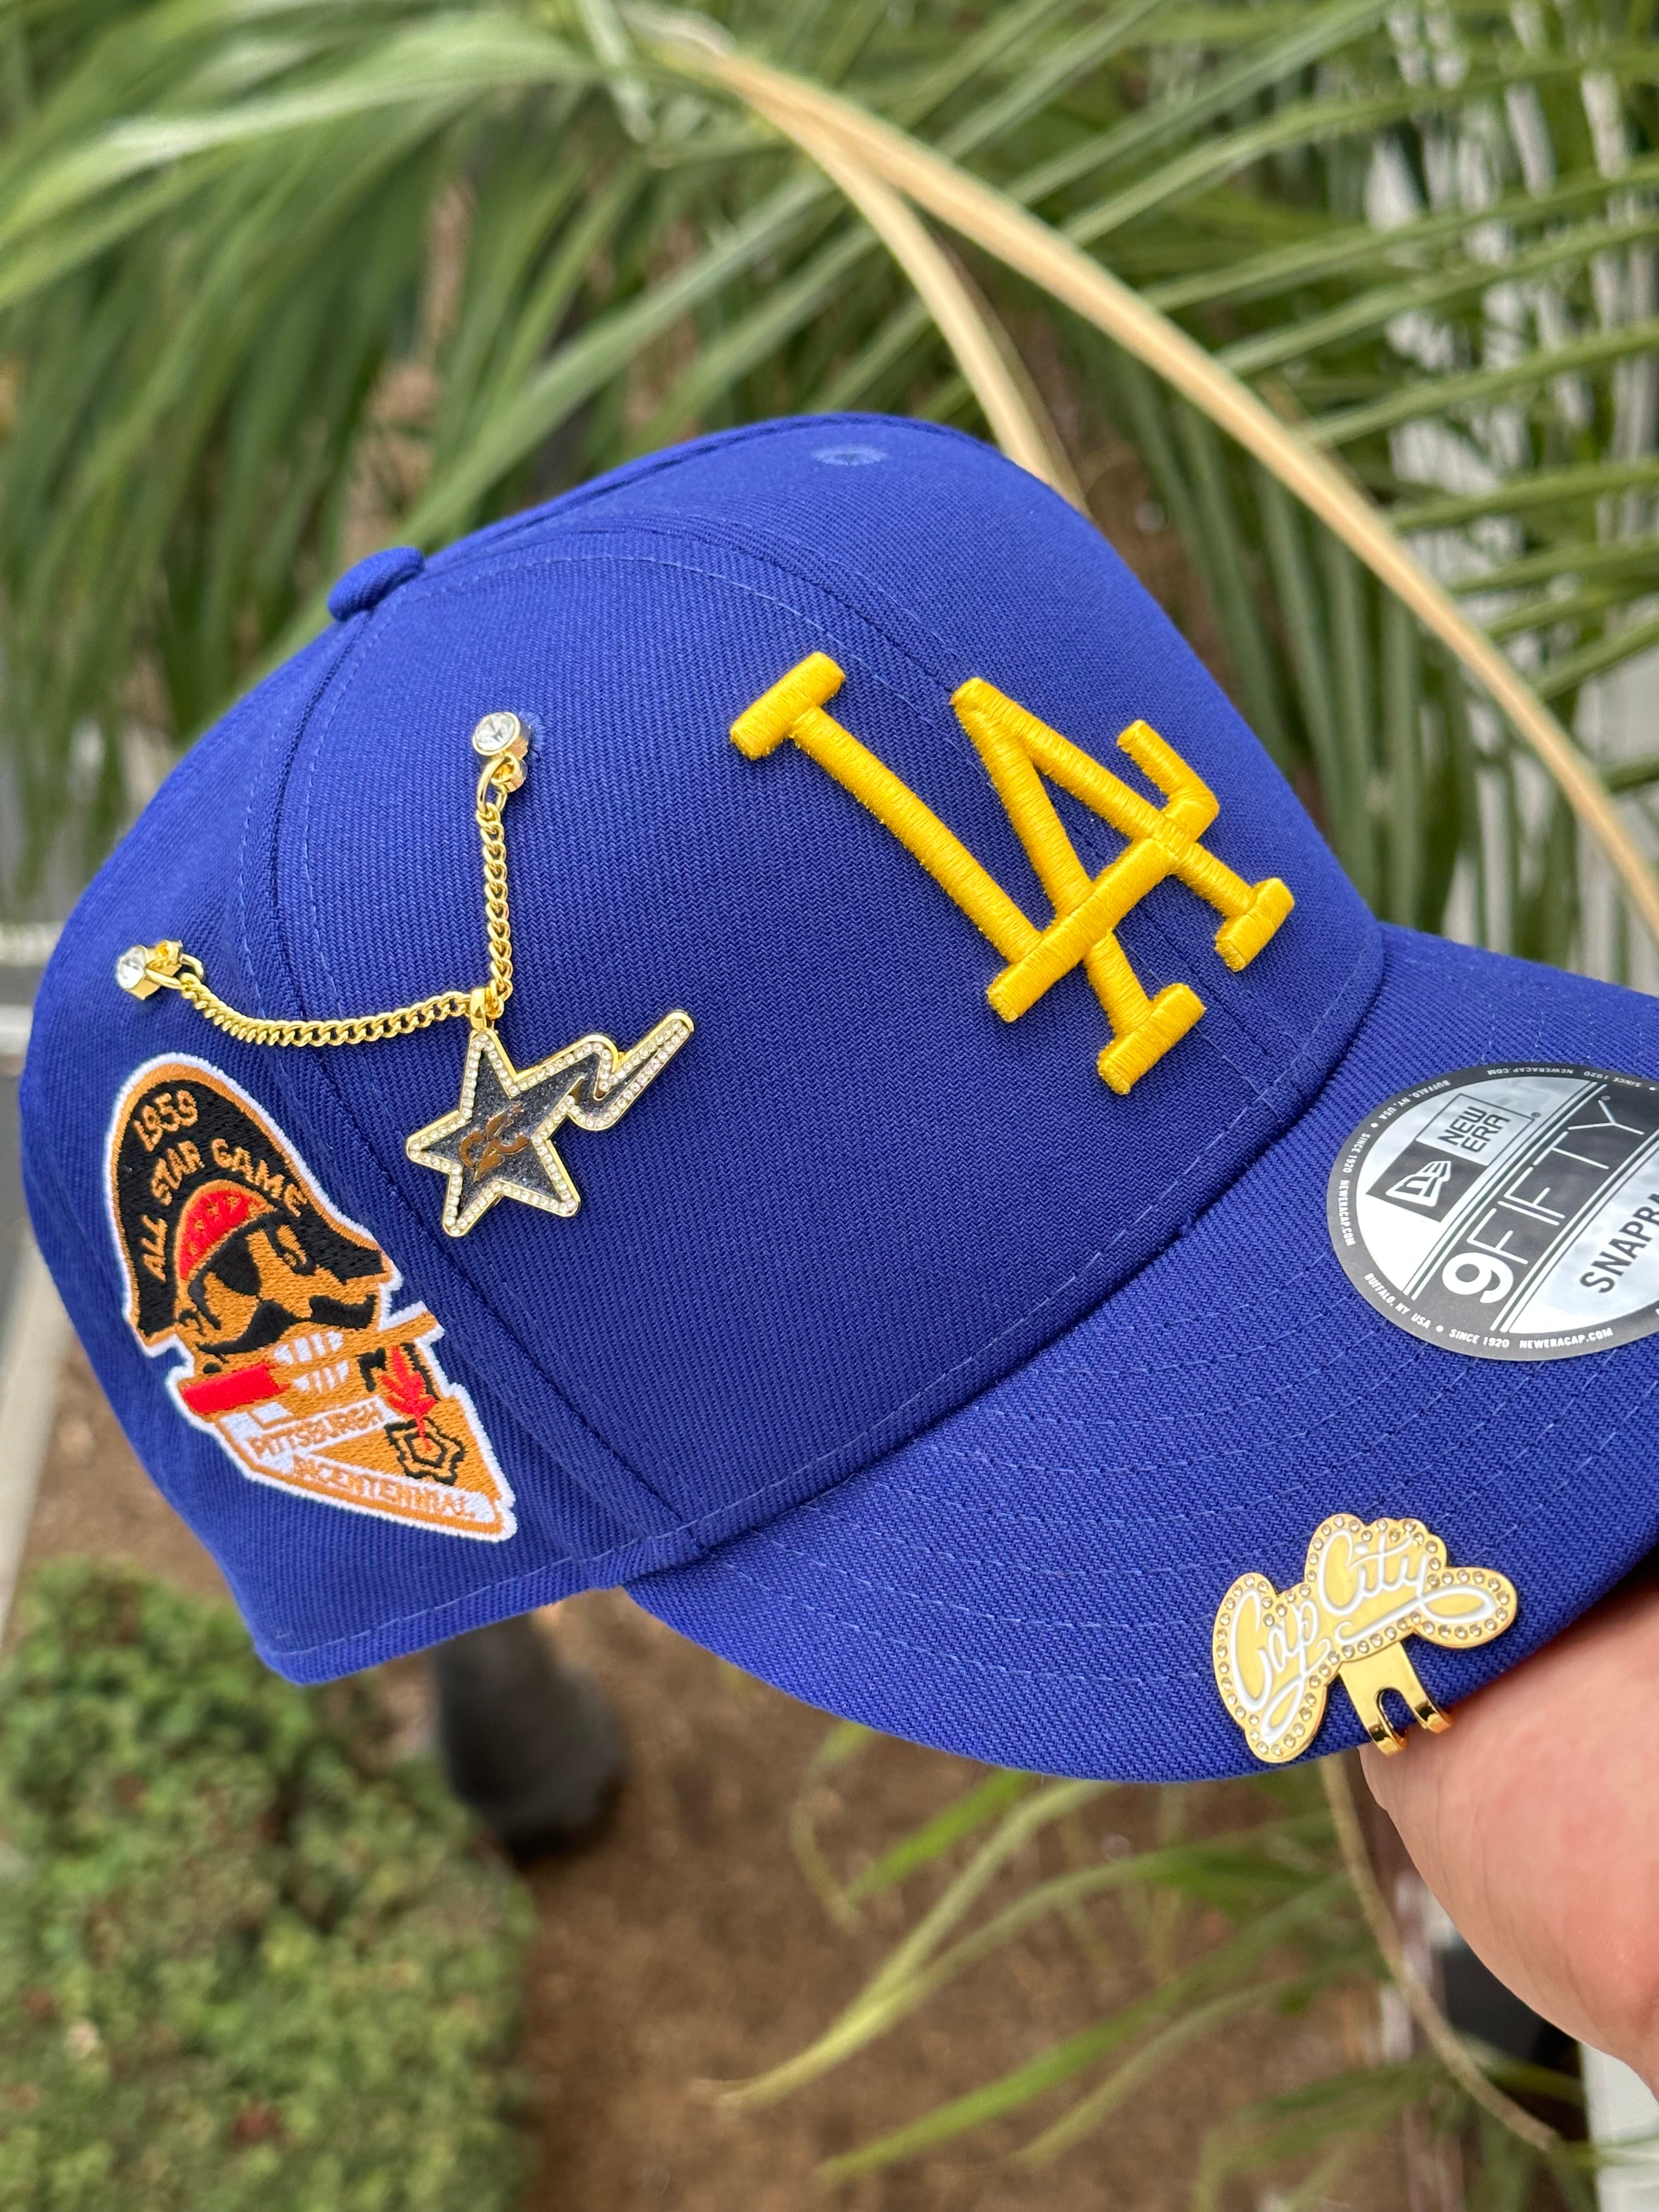 NEW ERA EXCLUSIVE 9FIFTY BLUE LOS ANGELES DODGERS SNAPBACK W/ 1959 ALL STAR GAME PATCH